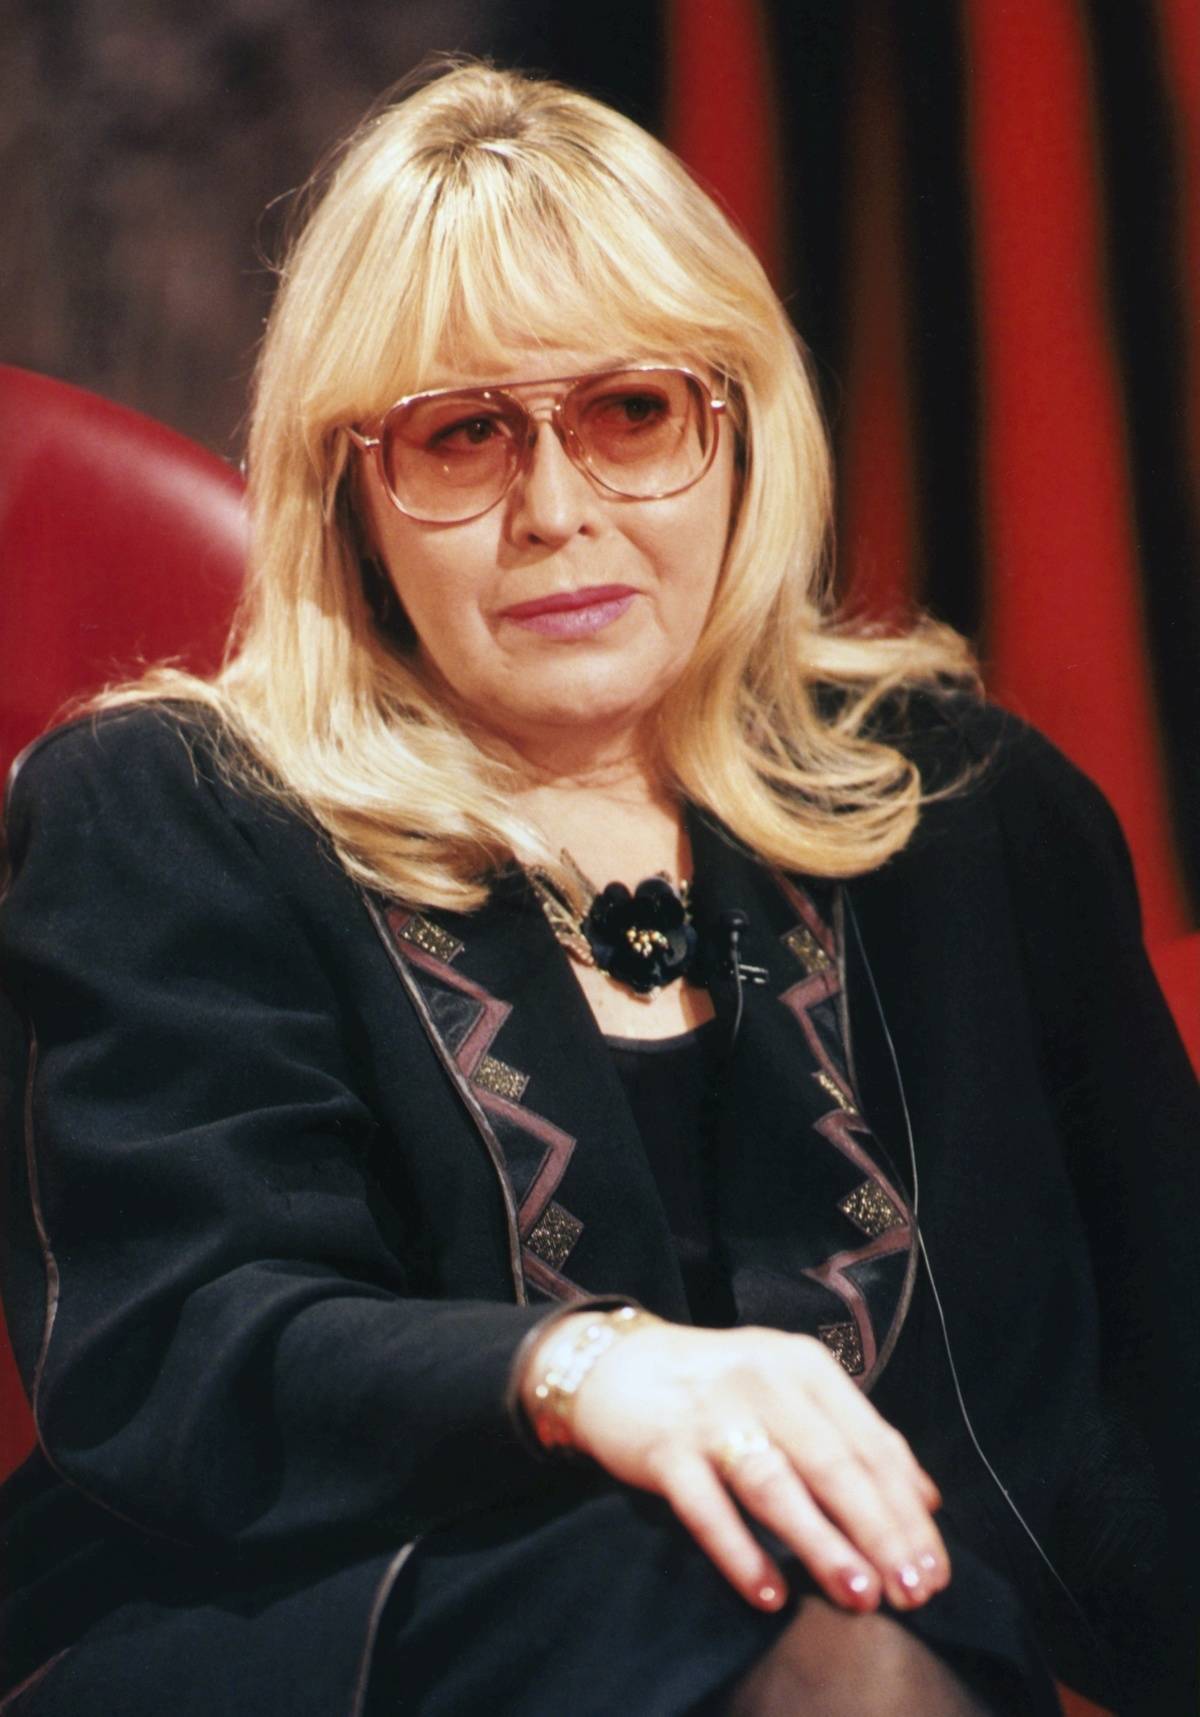 <p>Cynthia Lennon worked hard to raise Julian and protect him from media attention. As a result, Julian felt removed from his father's presence in the iconic band. </p> <p>In 1966 they went on a skiing trip together as a family, yet it was overwhelmed by followers who wouldn't leave them alone.</p>